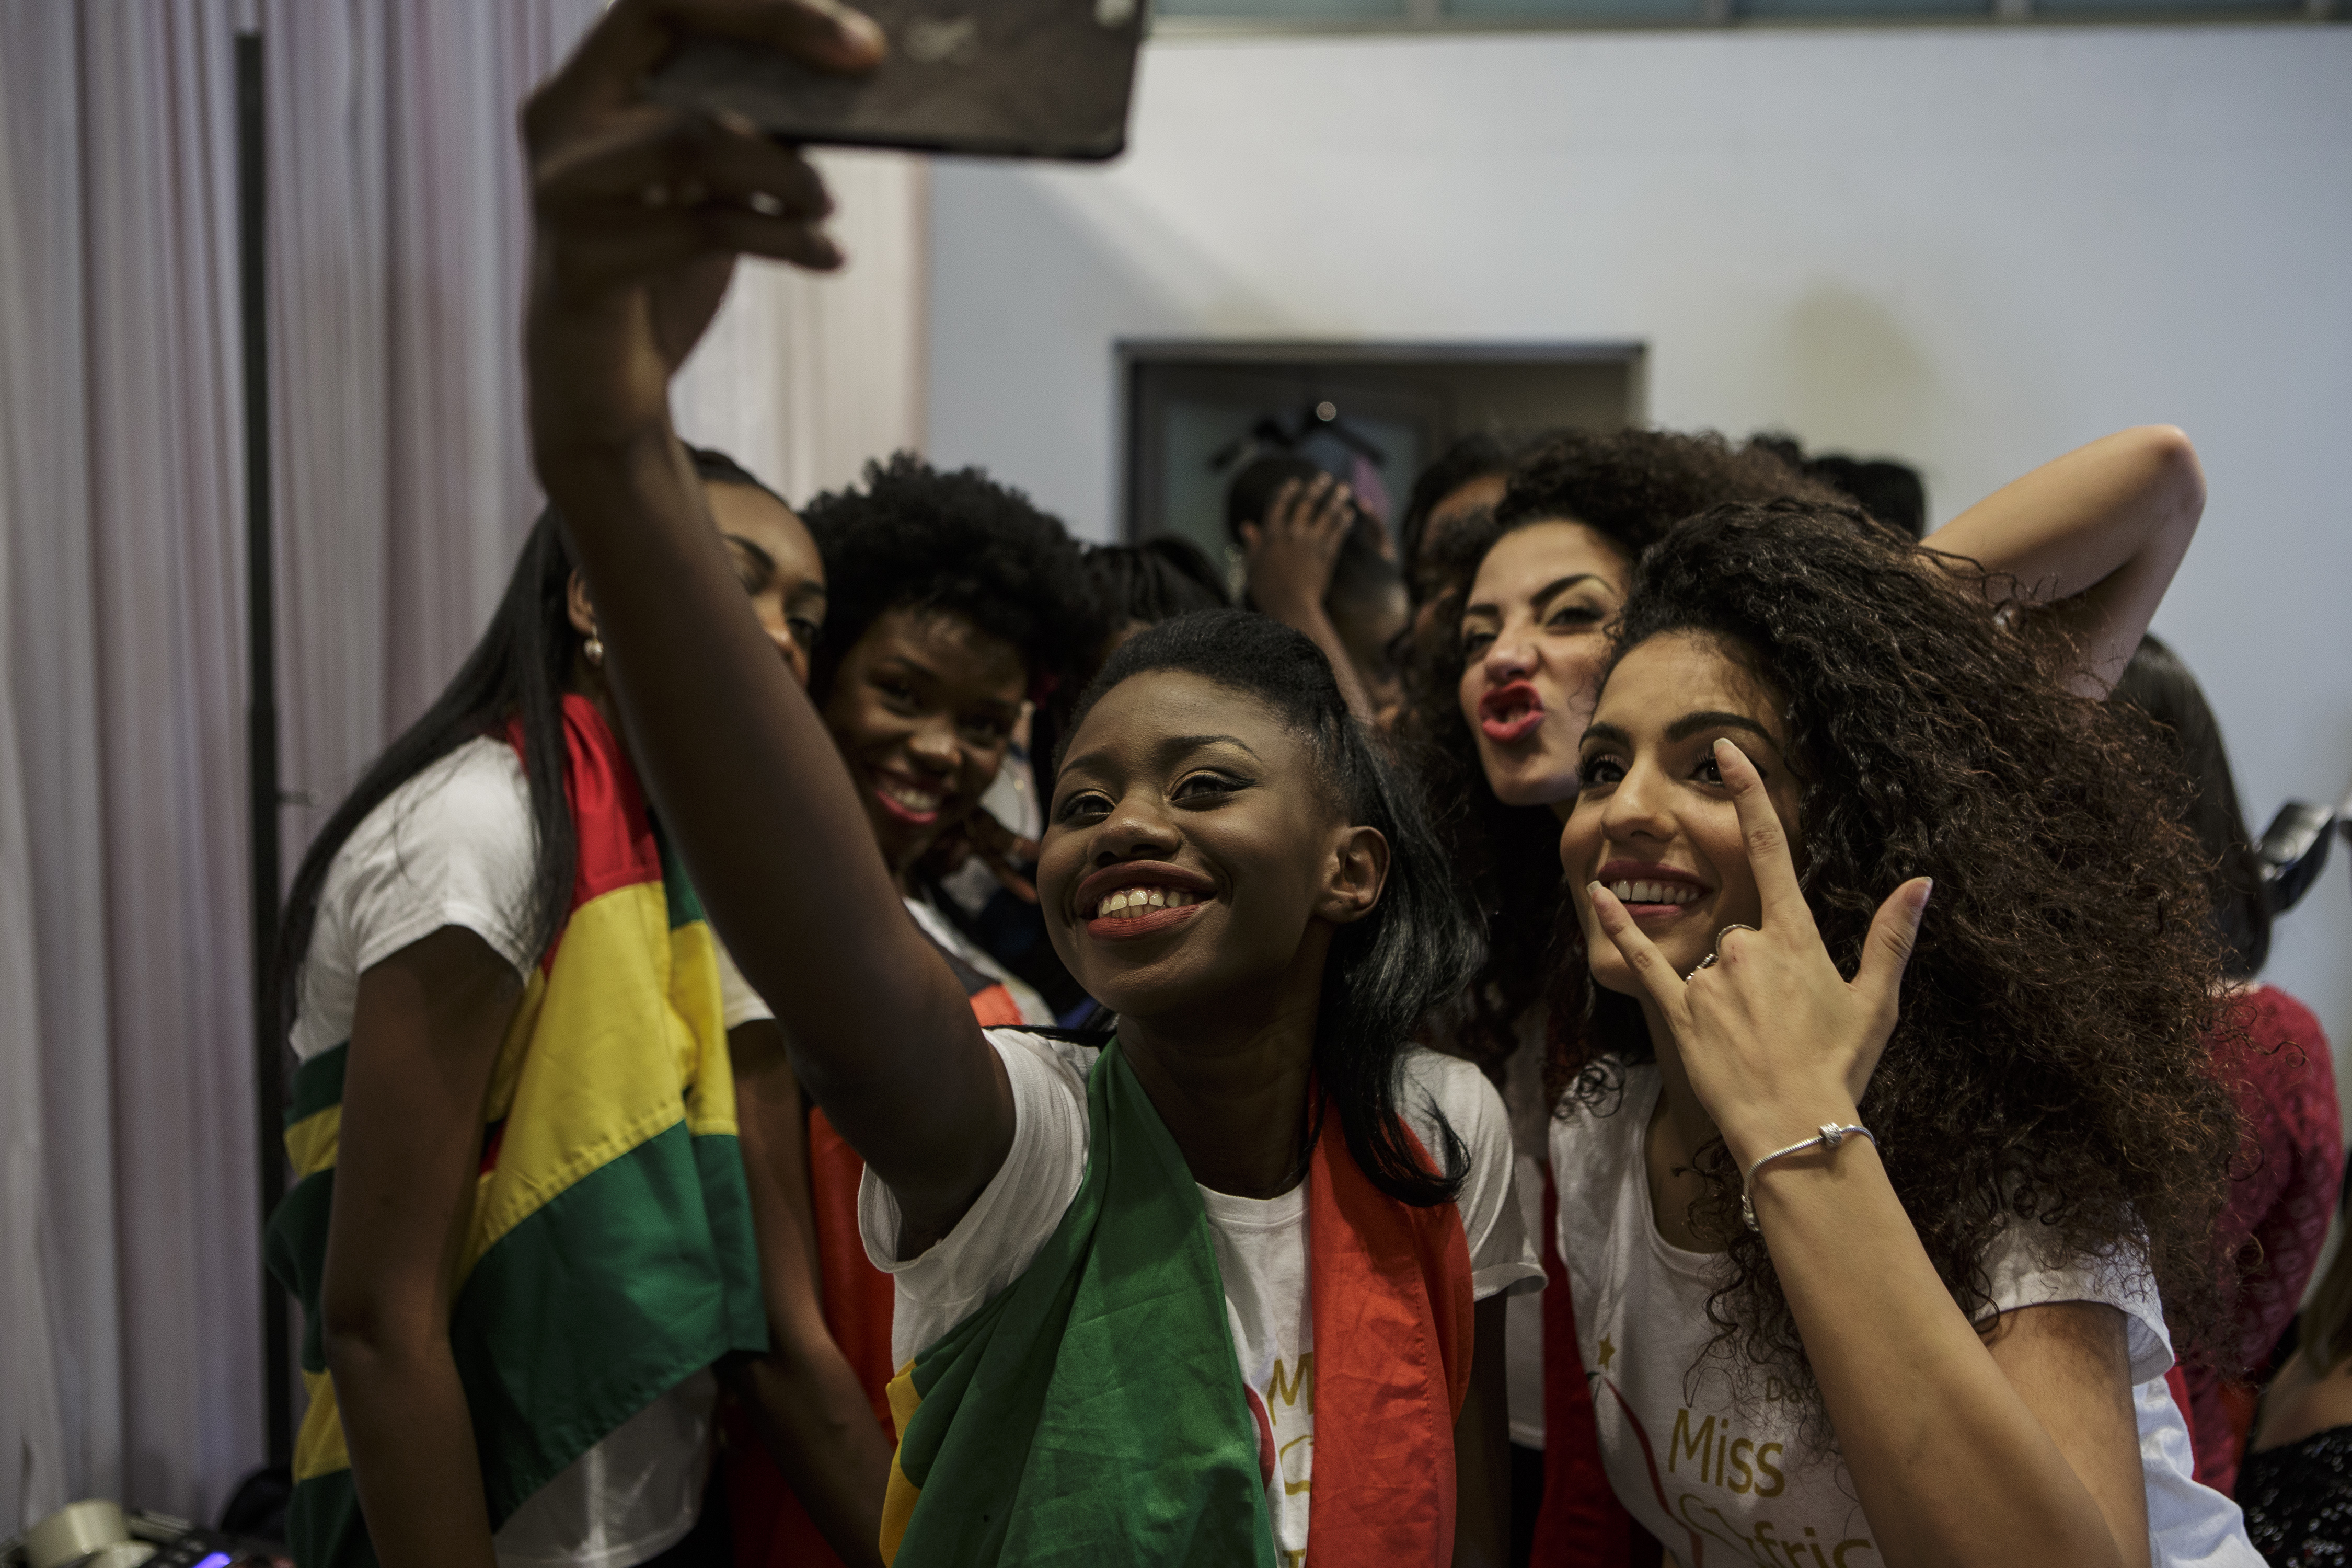 A group of contestants takes a selfie in the backstage ahead of the 3rd edition of Miss Africa Italy, on December 16, 2017 in Milan, Italy.